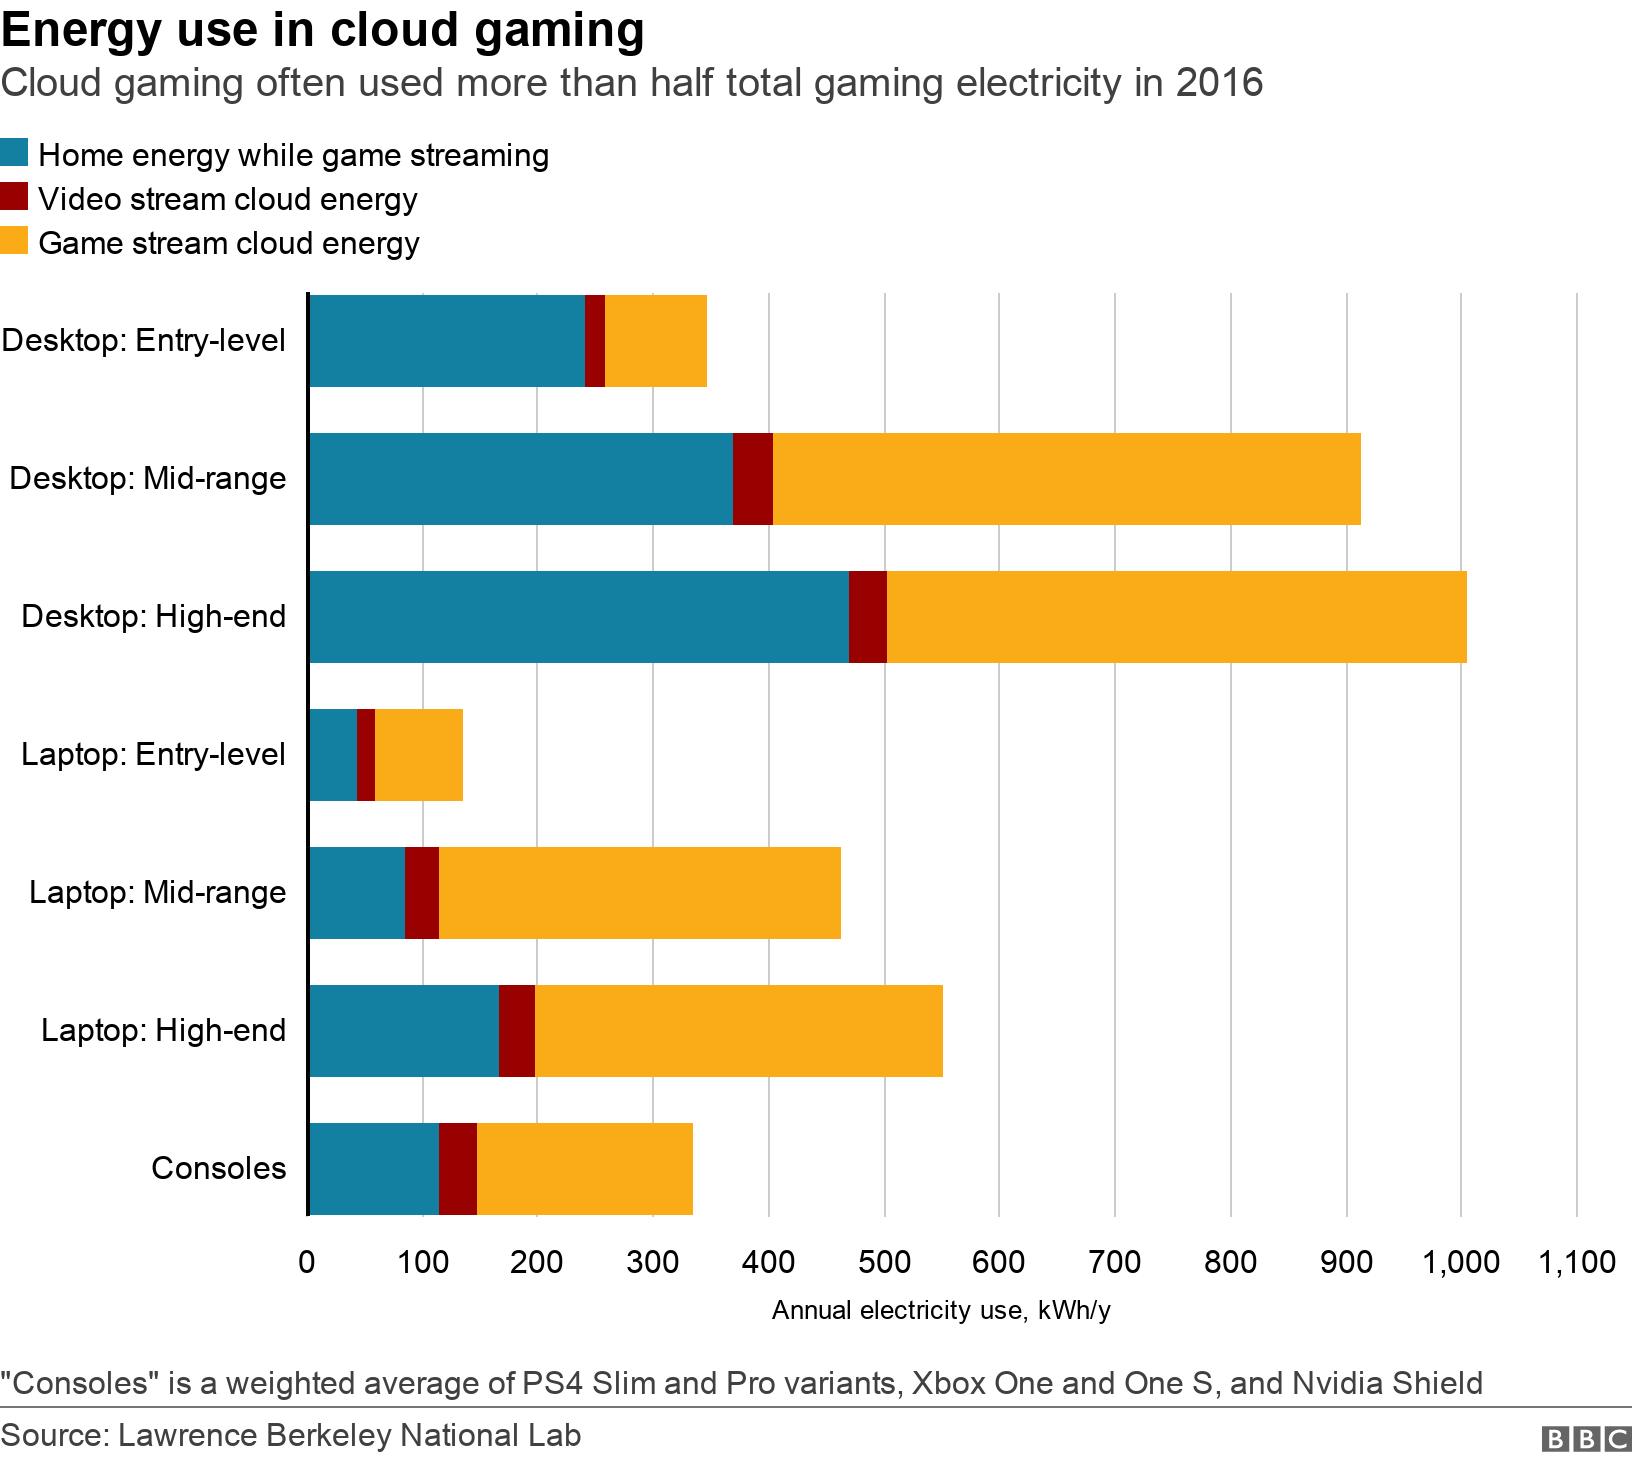 Energy use in cloud gaming. Cloud gaming often used more than half total gaming electricity in 2016.  "Consoles" is a weighted average of PS4 Slim and Pro variants, Xbox One and One S, and Nvidia Shield.